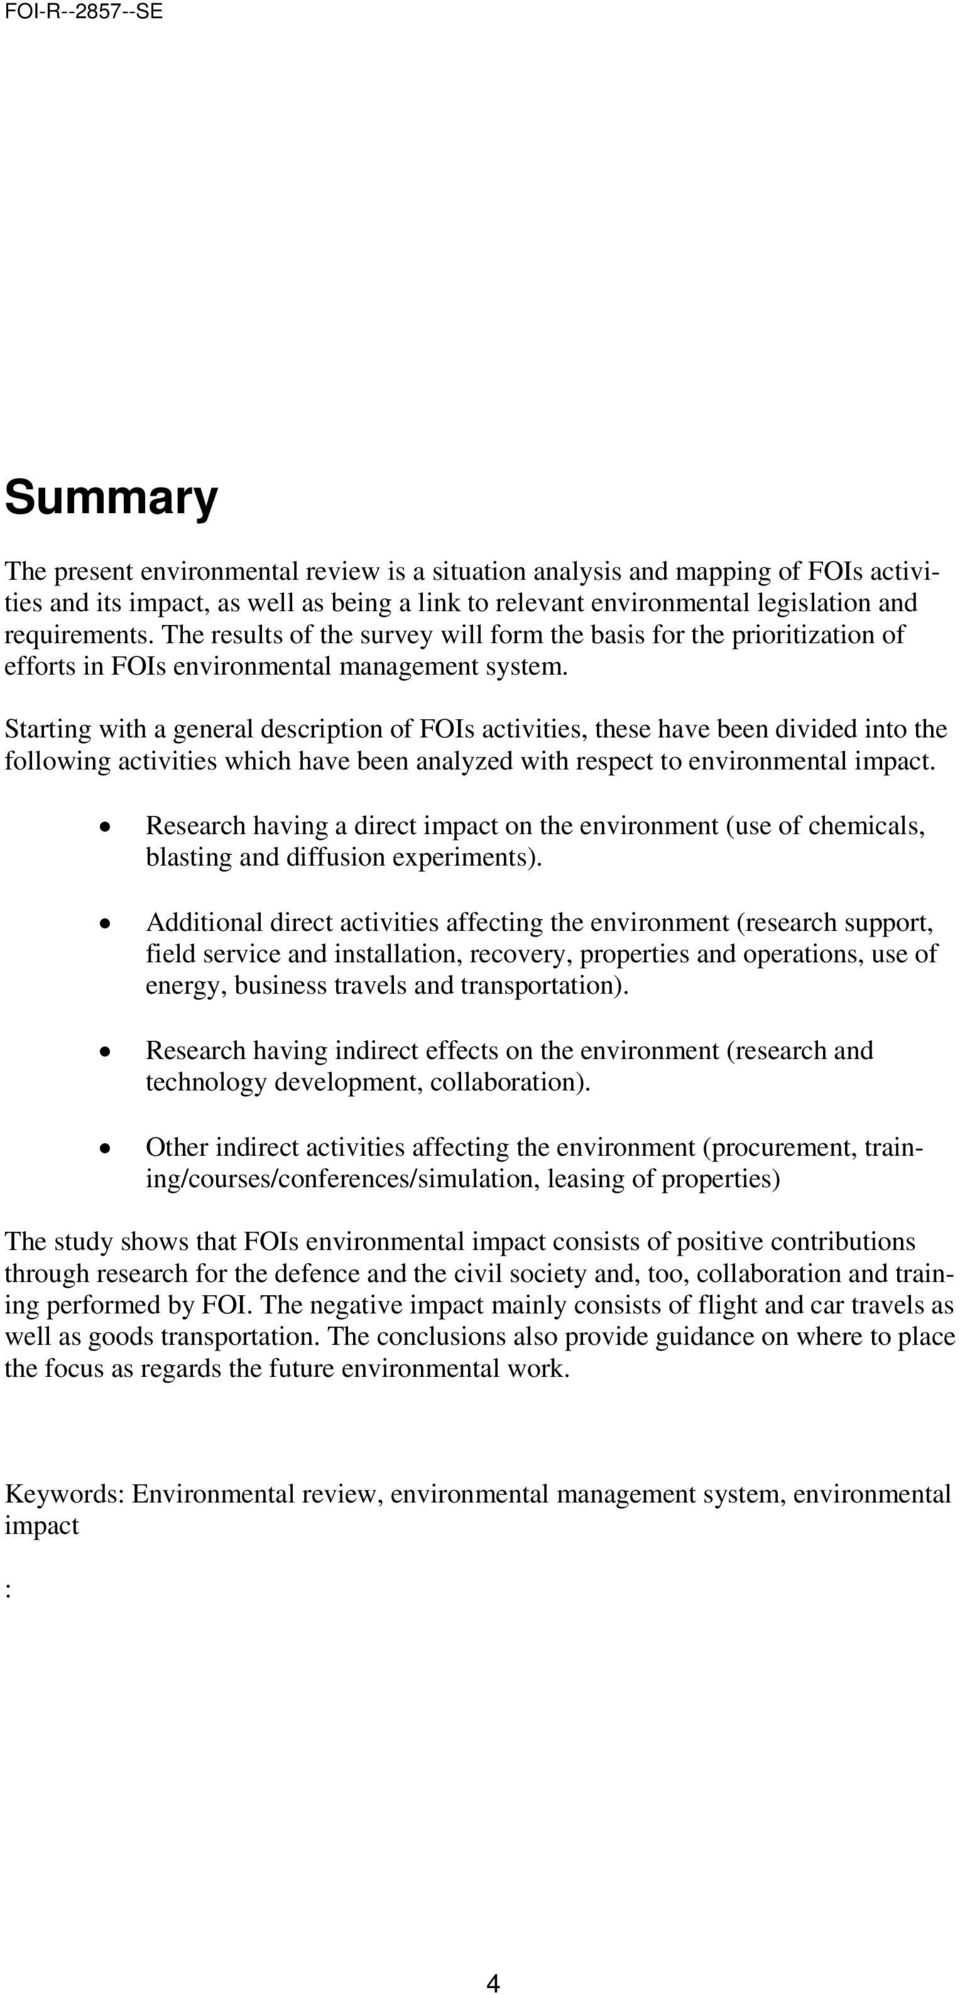 Starting with a general description of FOIs activities, these have been divided into the following activities which have been analyzed with respect to environmental impact.